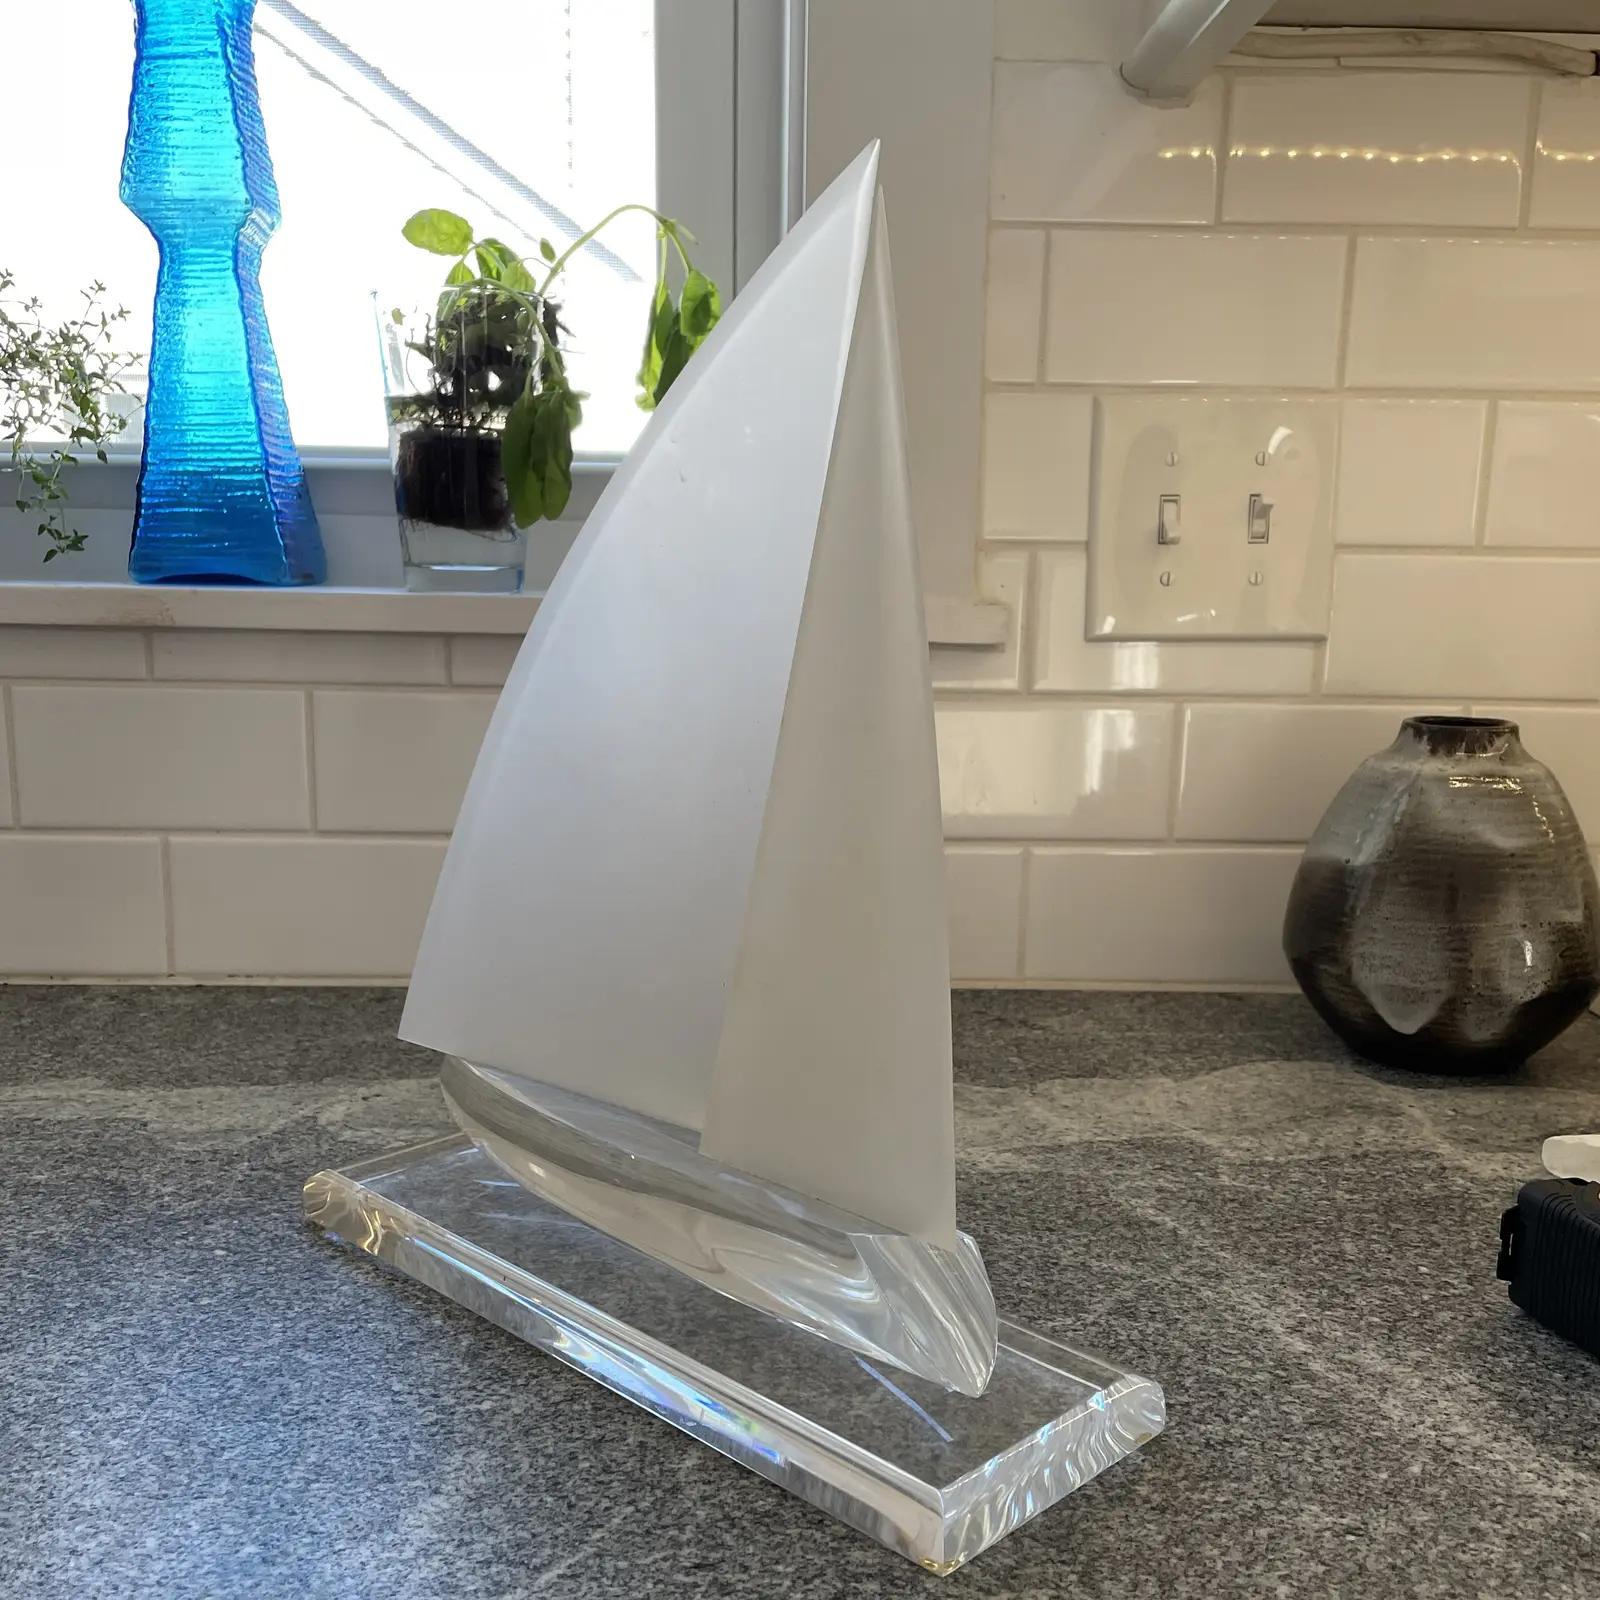 Unique frosted and clear Lucite sculpture of sailboat underway. Wonderful inviting movement as boat is heeling to one side.